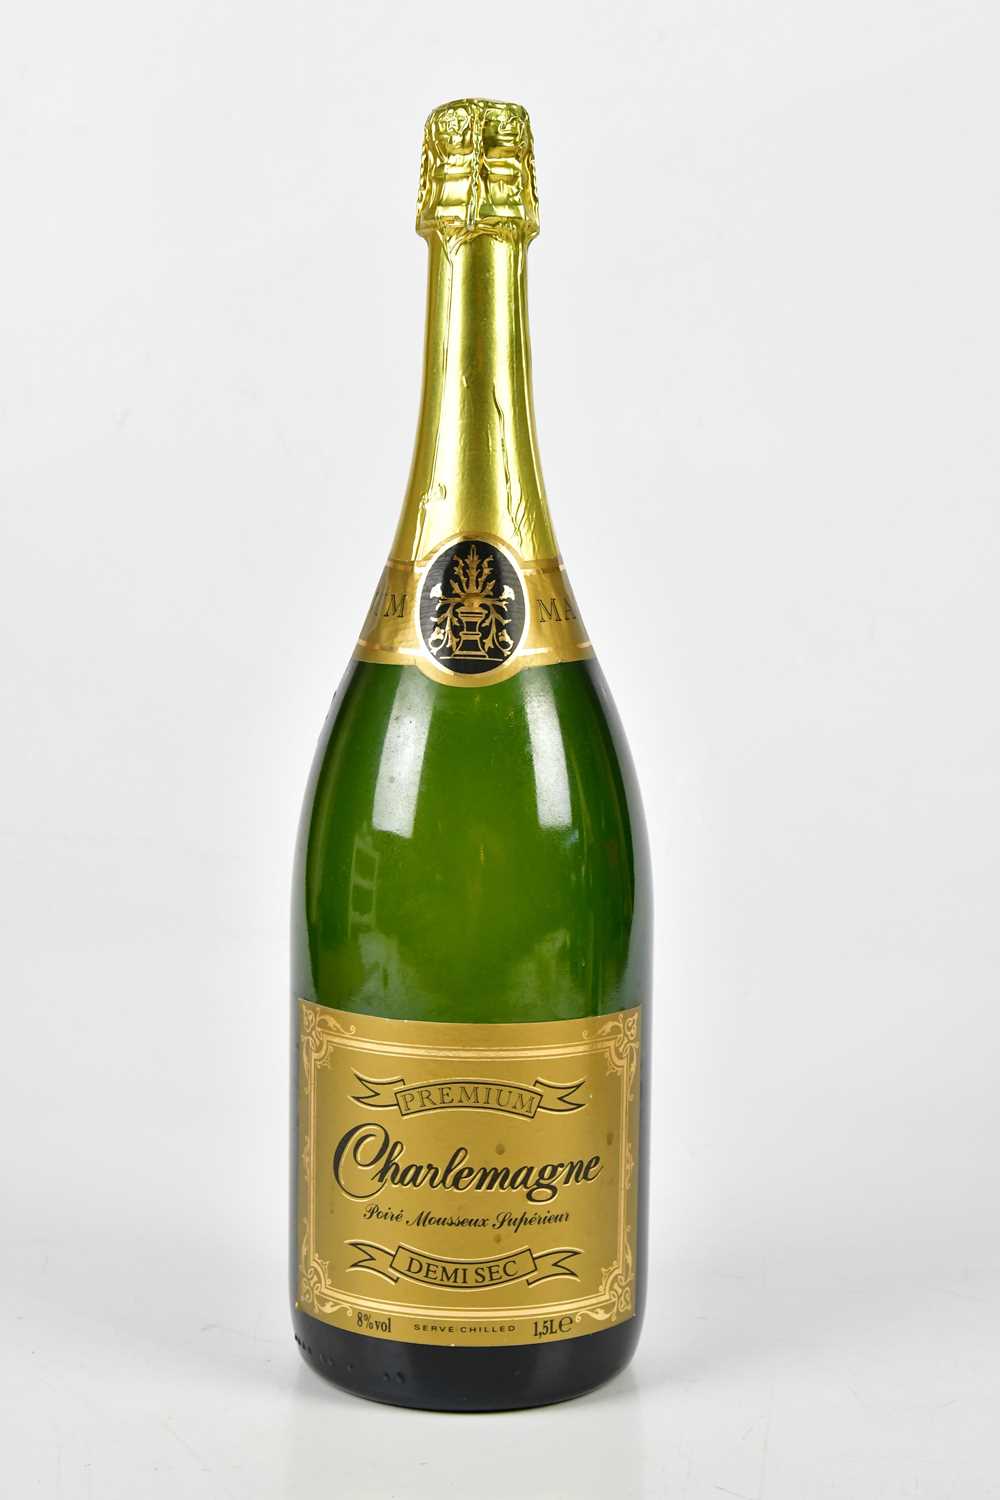 CHAMPAGNE; a magnum bottle of Moët & Chandon, Brut Imperial, 150cl, 12%, and a bottle of Gauthier, - Image 4 of 5